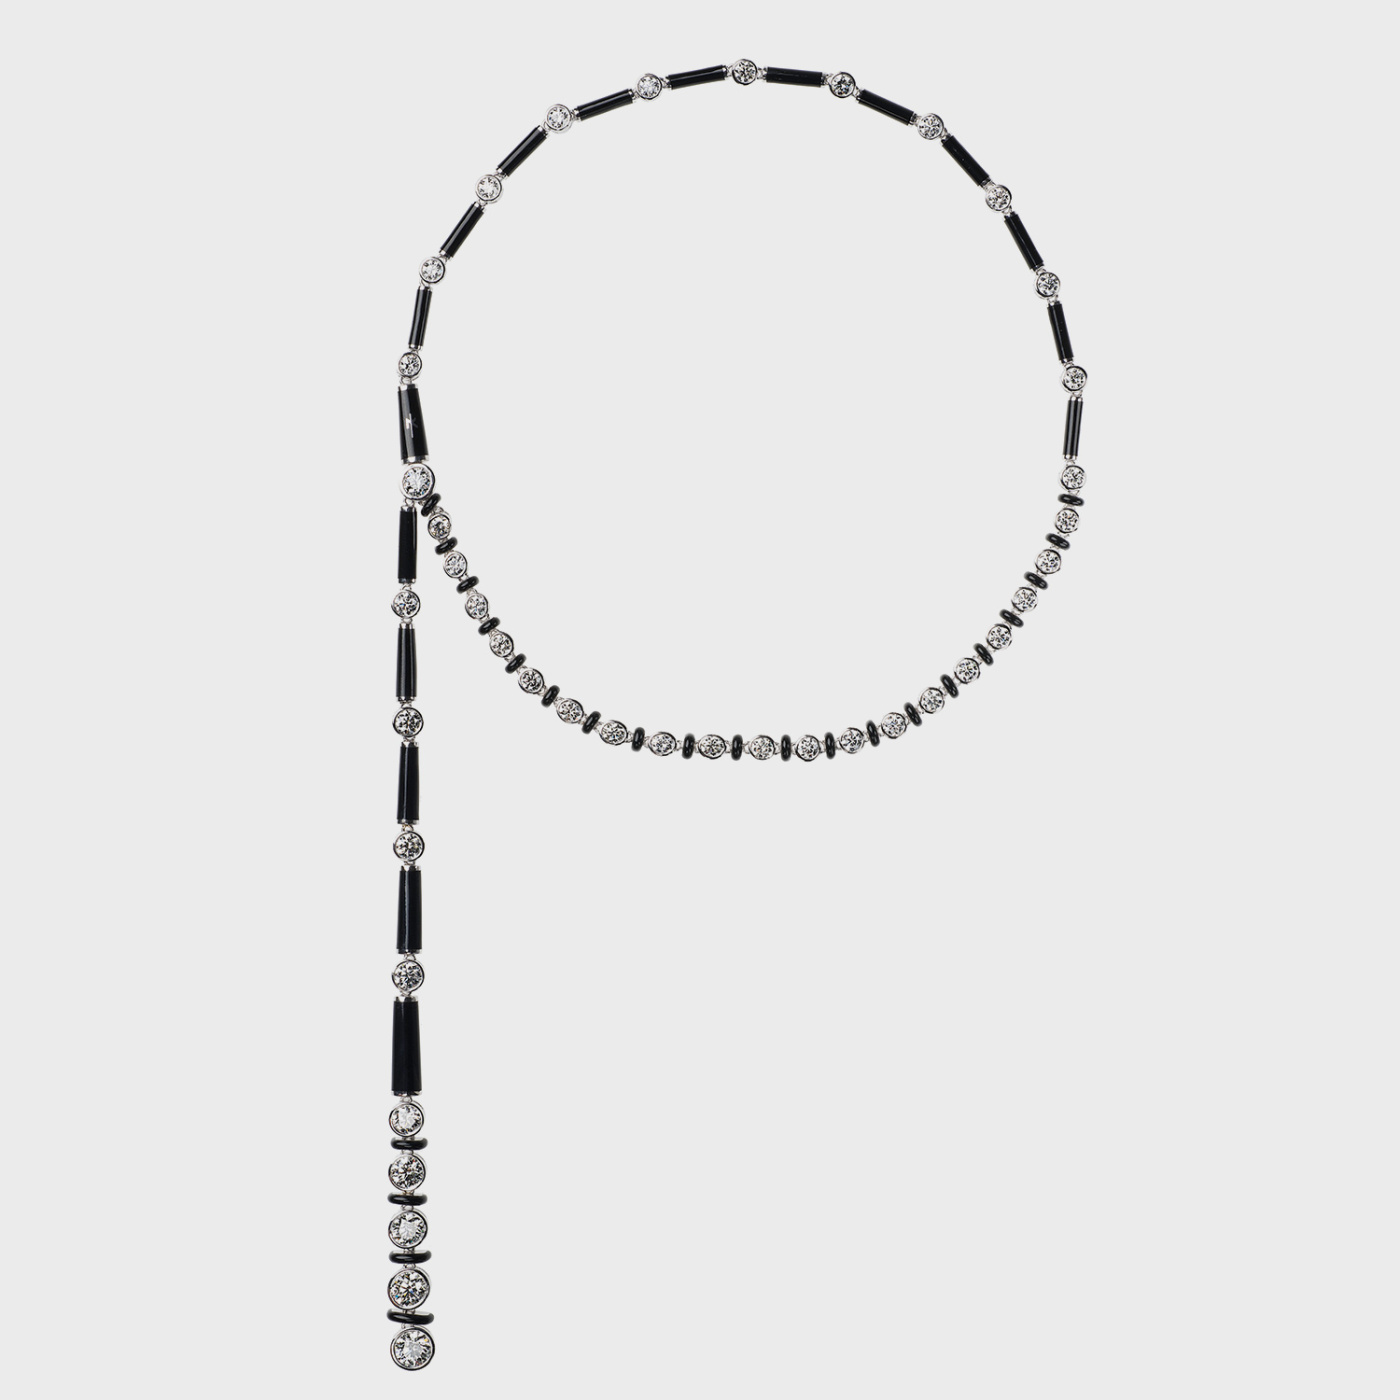 White gold tassel long necklace with white diamonds and black enamel